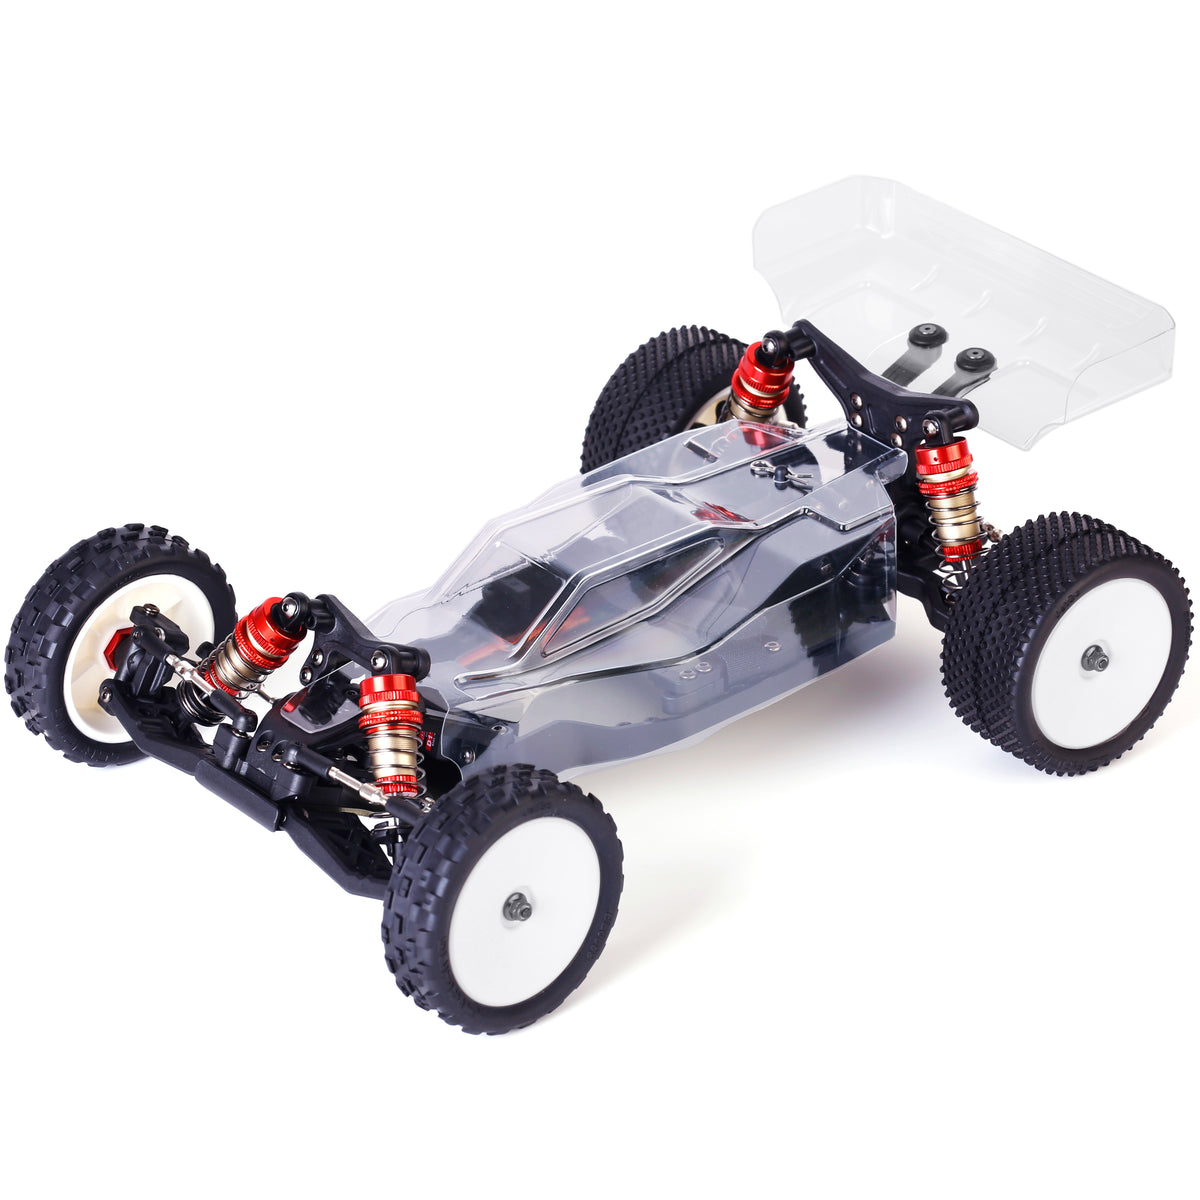 BHC-1 1/14 2WD Buggy - Kit (Free Shipping)